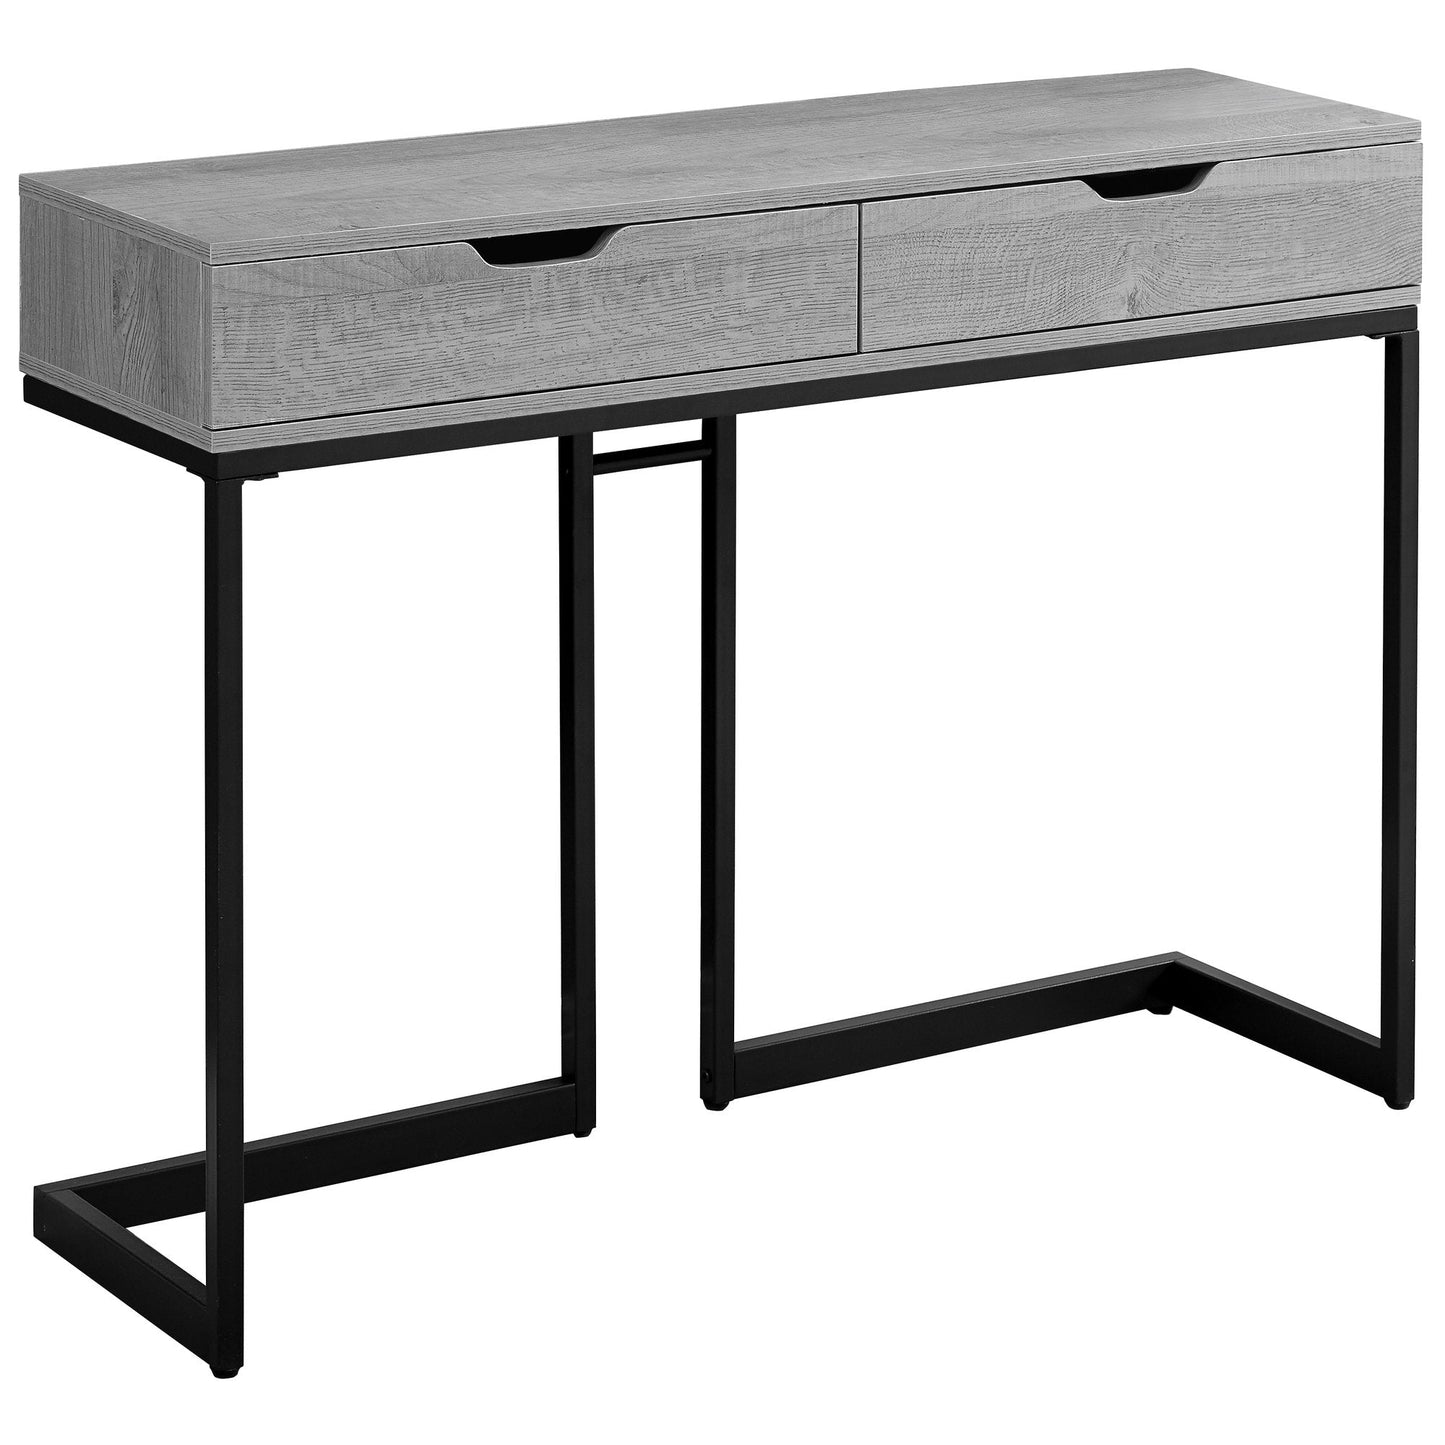 42"L Metal Frame Wood Tabletop Bedroom Accent Hall Console Table